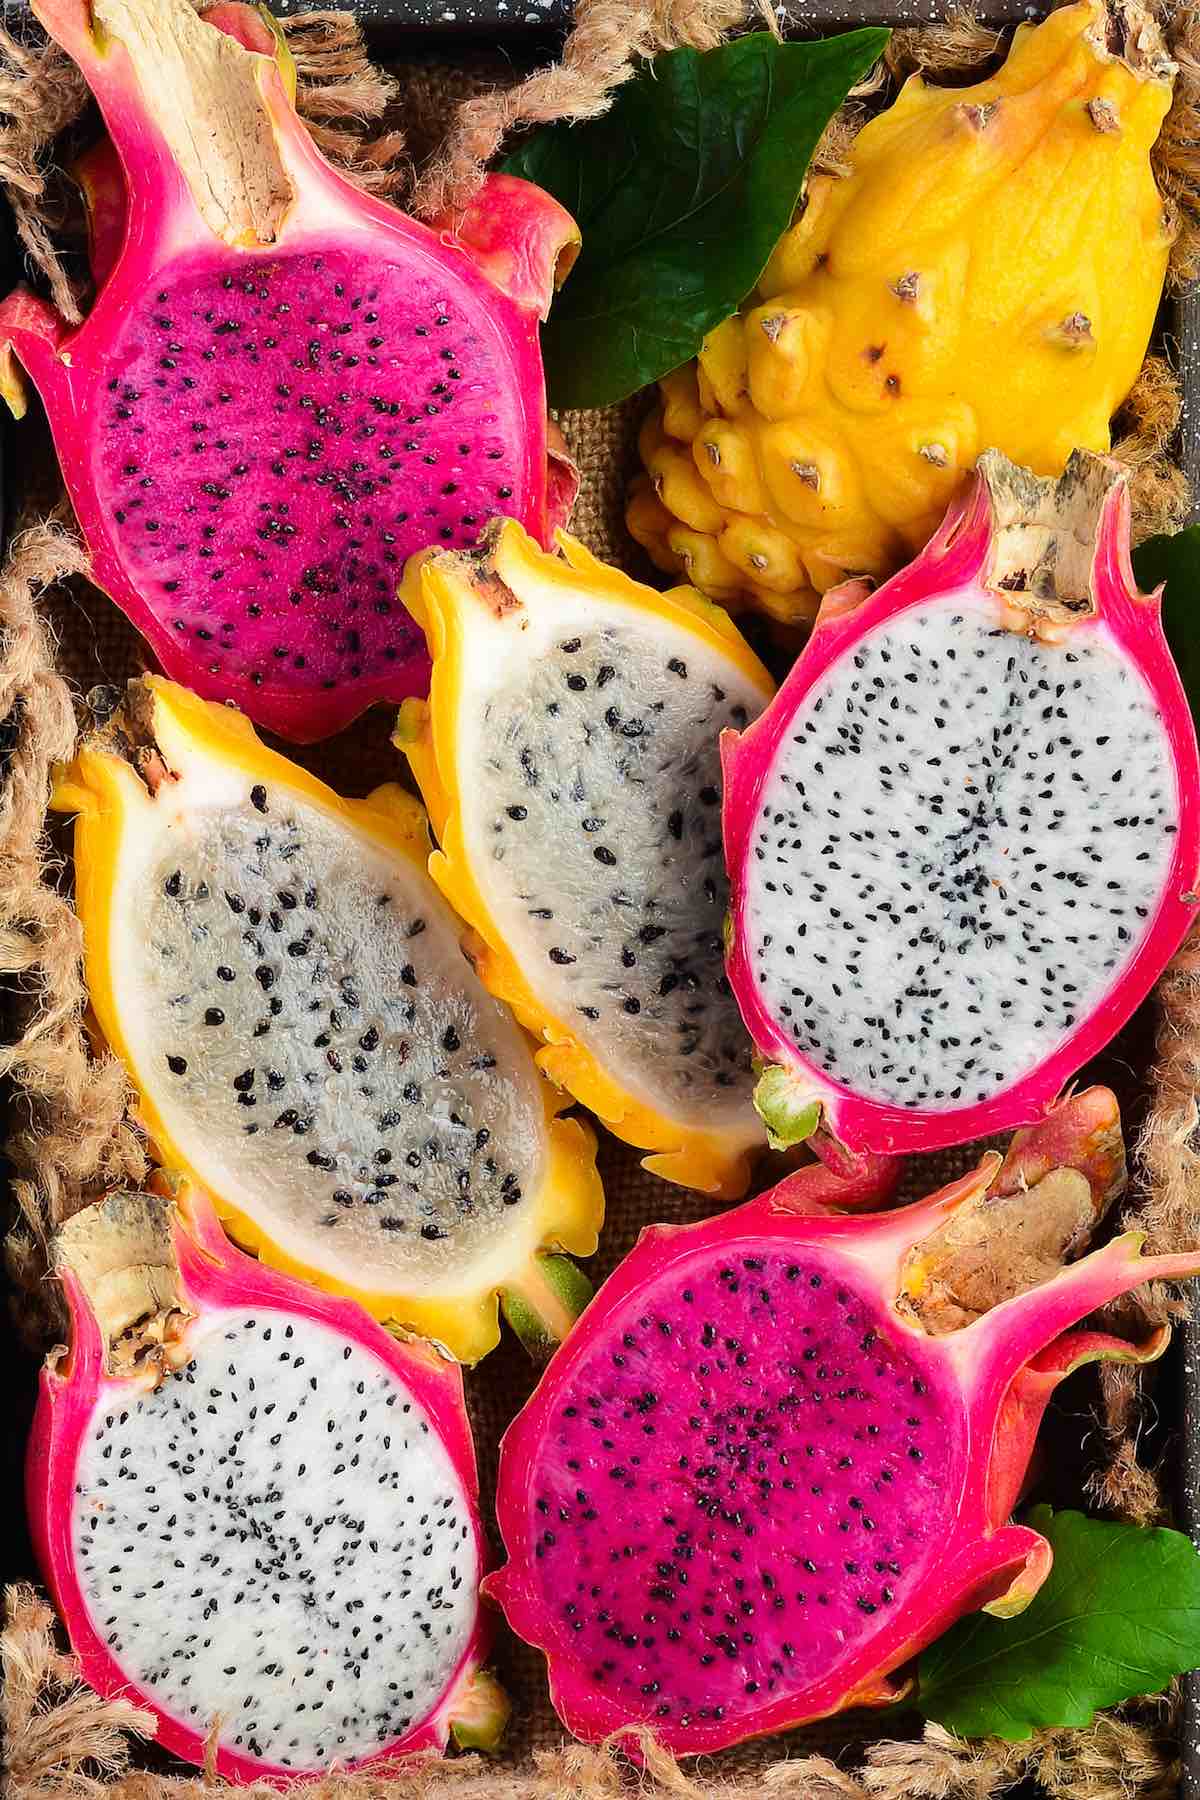 Side-by-side comparison of red, white and yellow dragon fruit showing the different colors and textures of the flesh